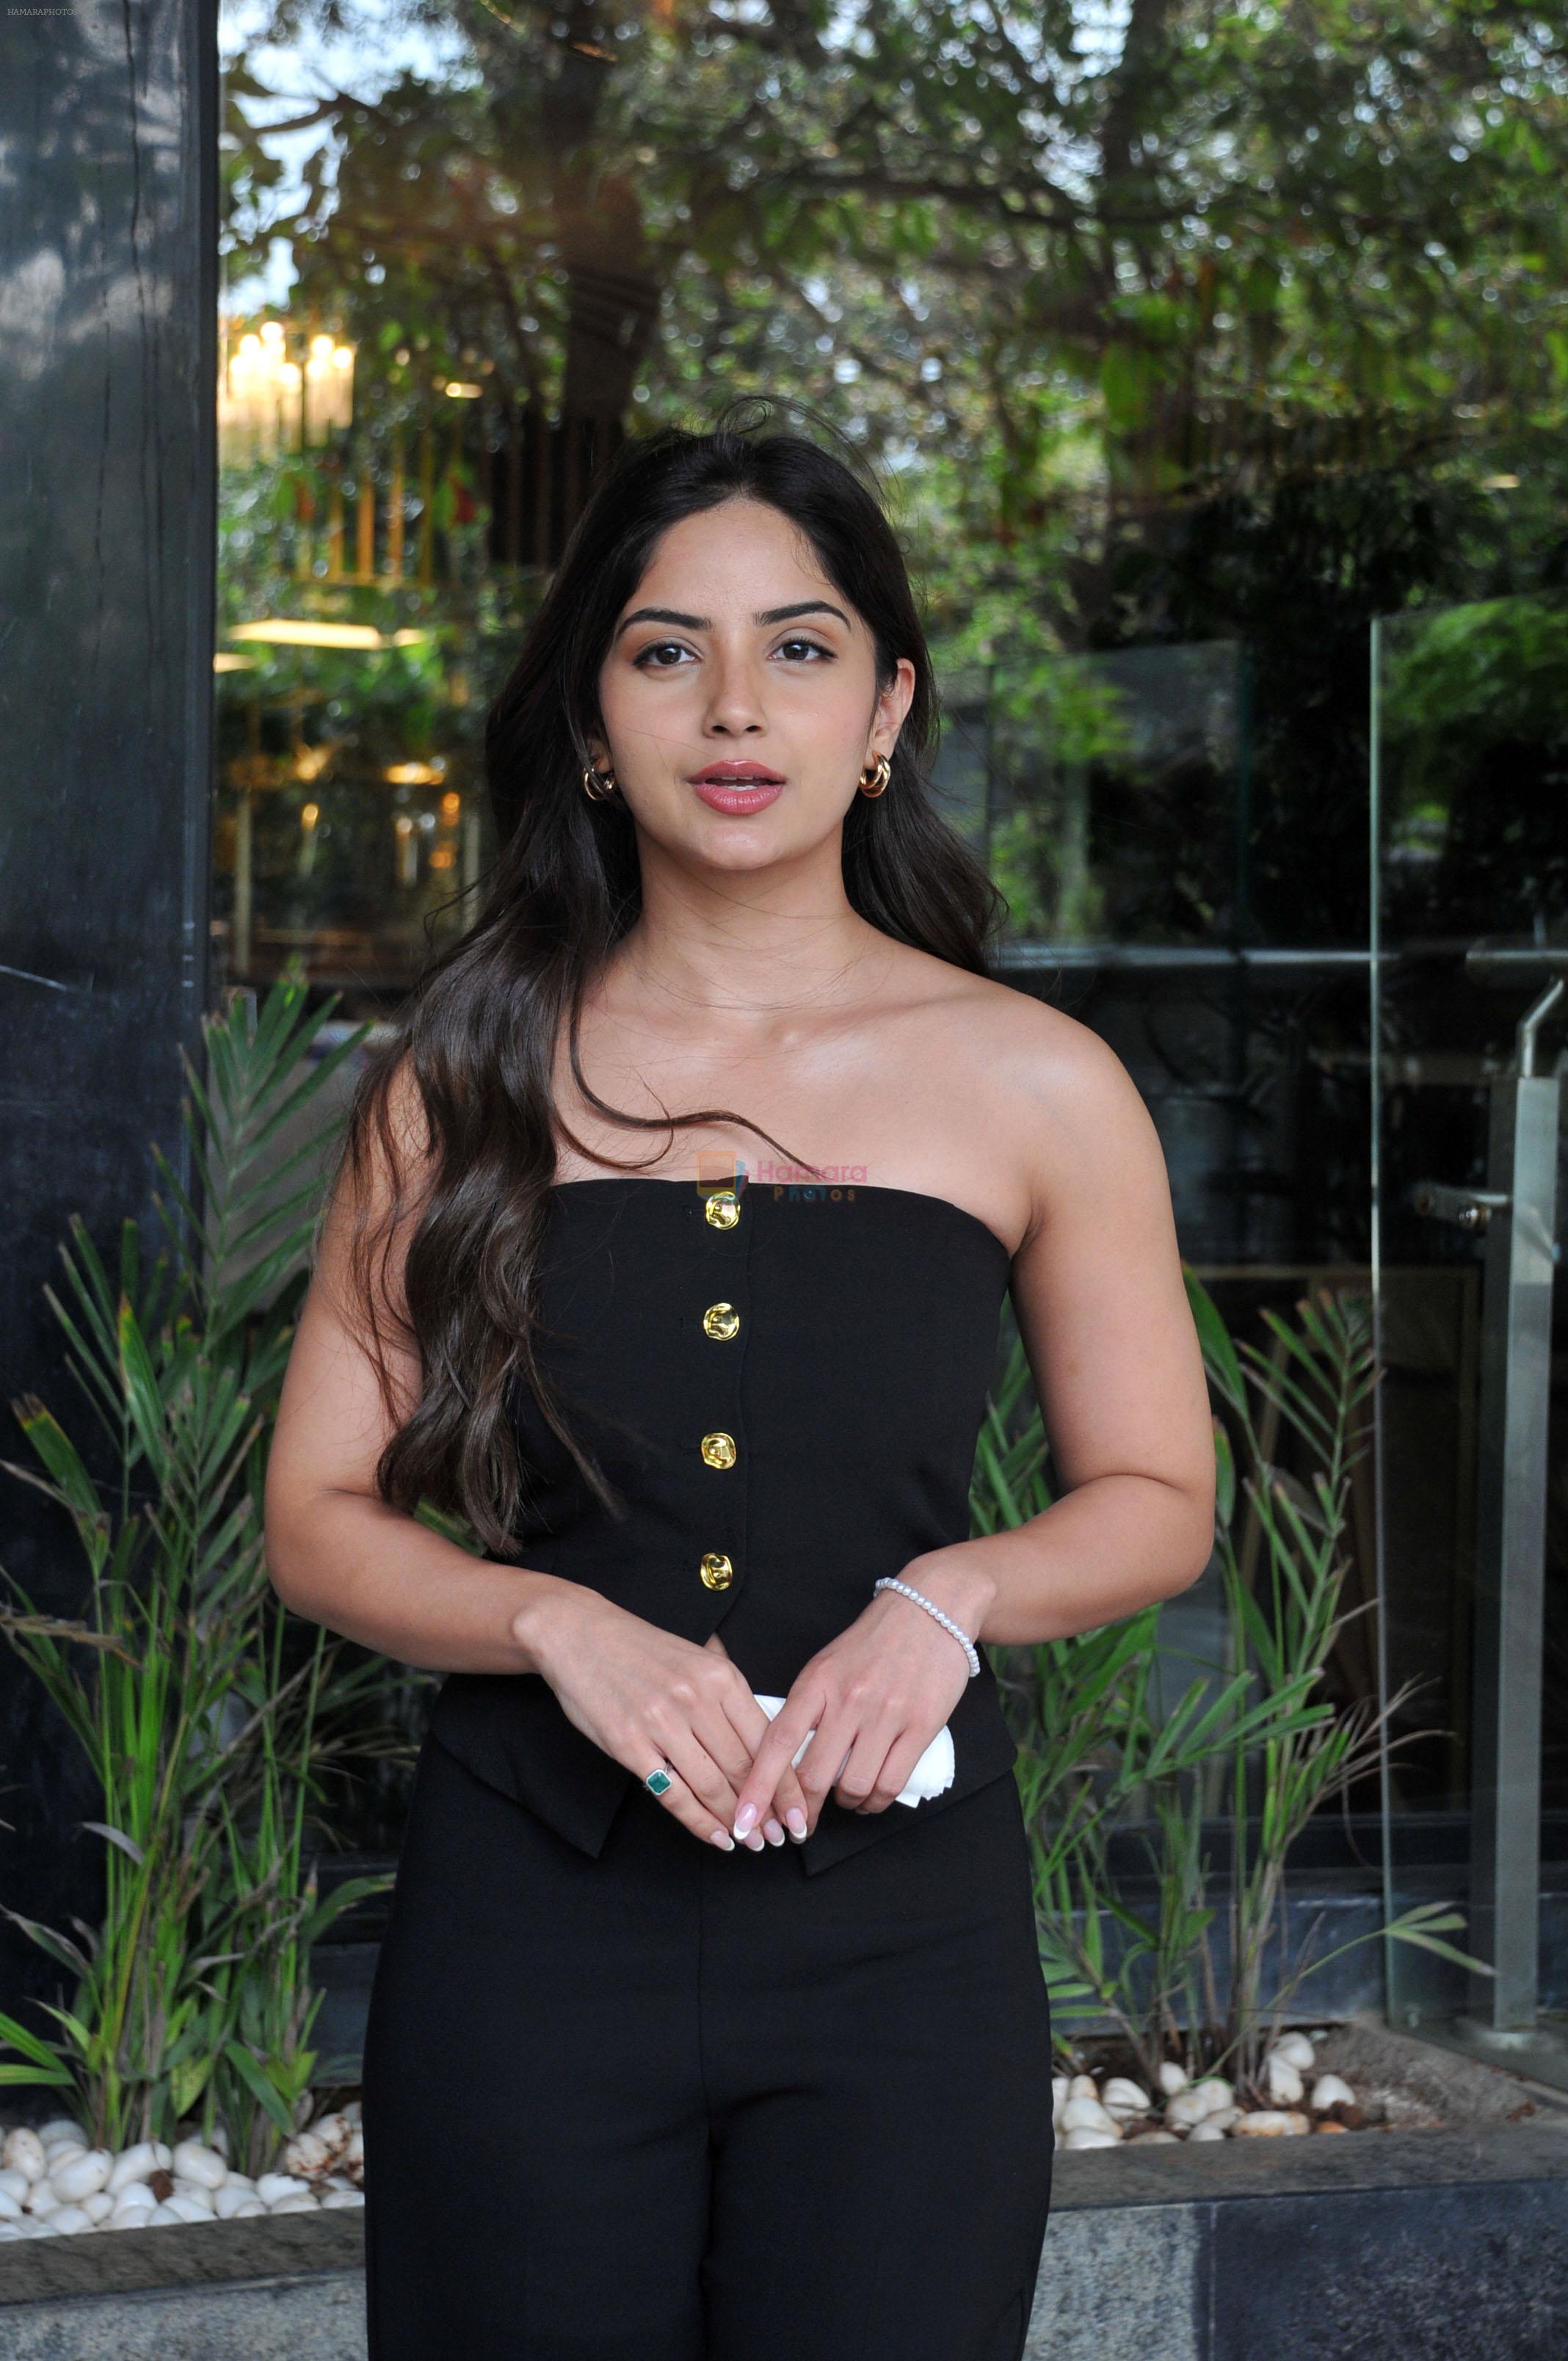 Kashmira Pardeshi promoting The Freelancer series at Hyatt Centric in Juhu on 17th August 2023